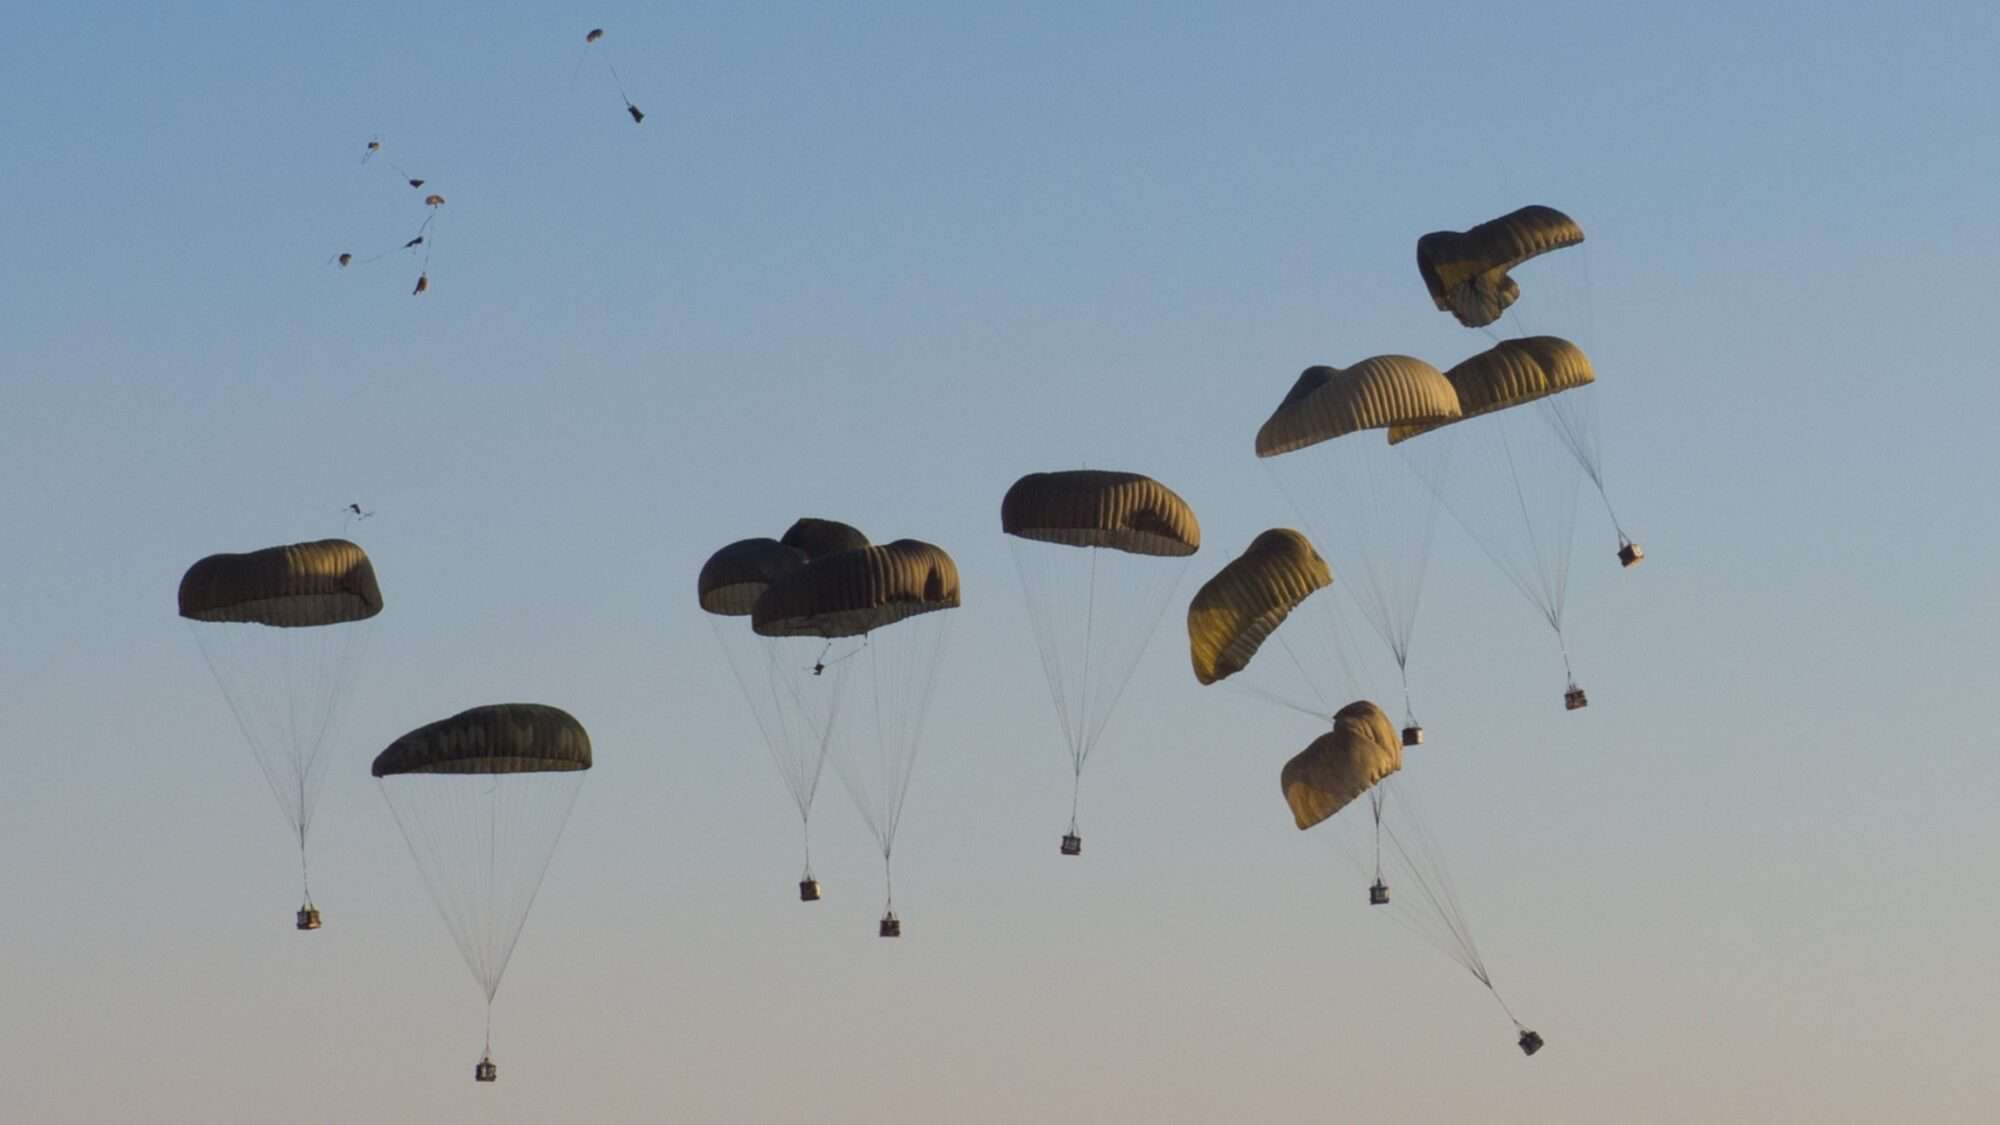 Boxes of supplies are parachuted from the sky.